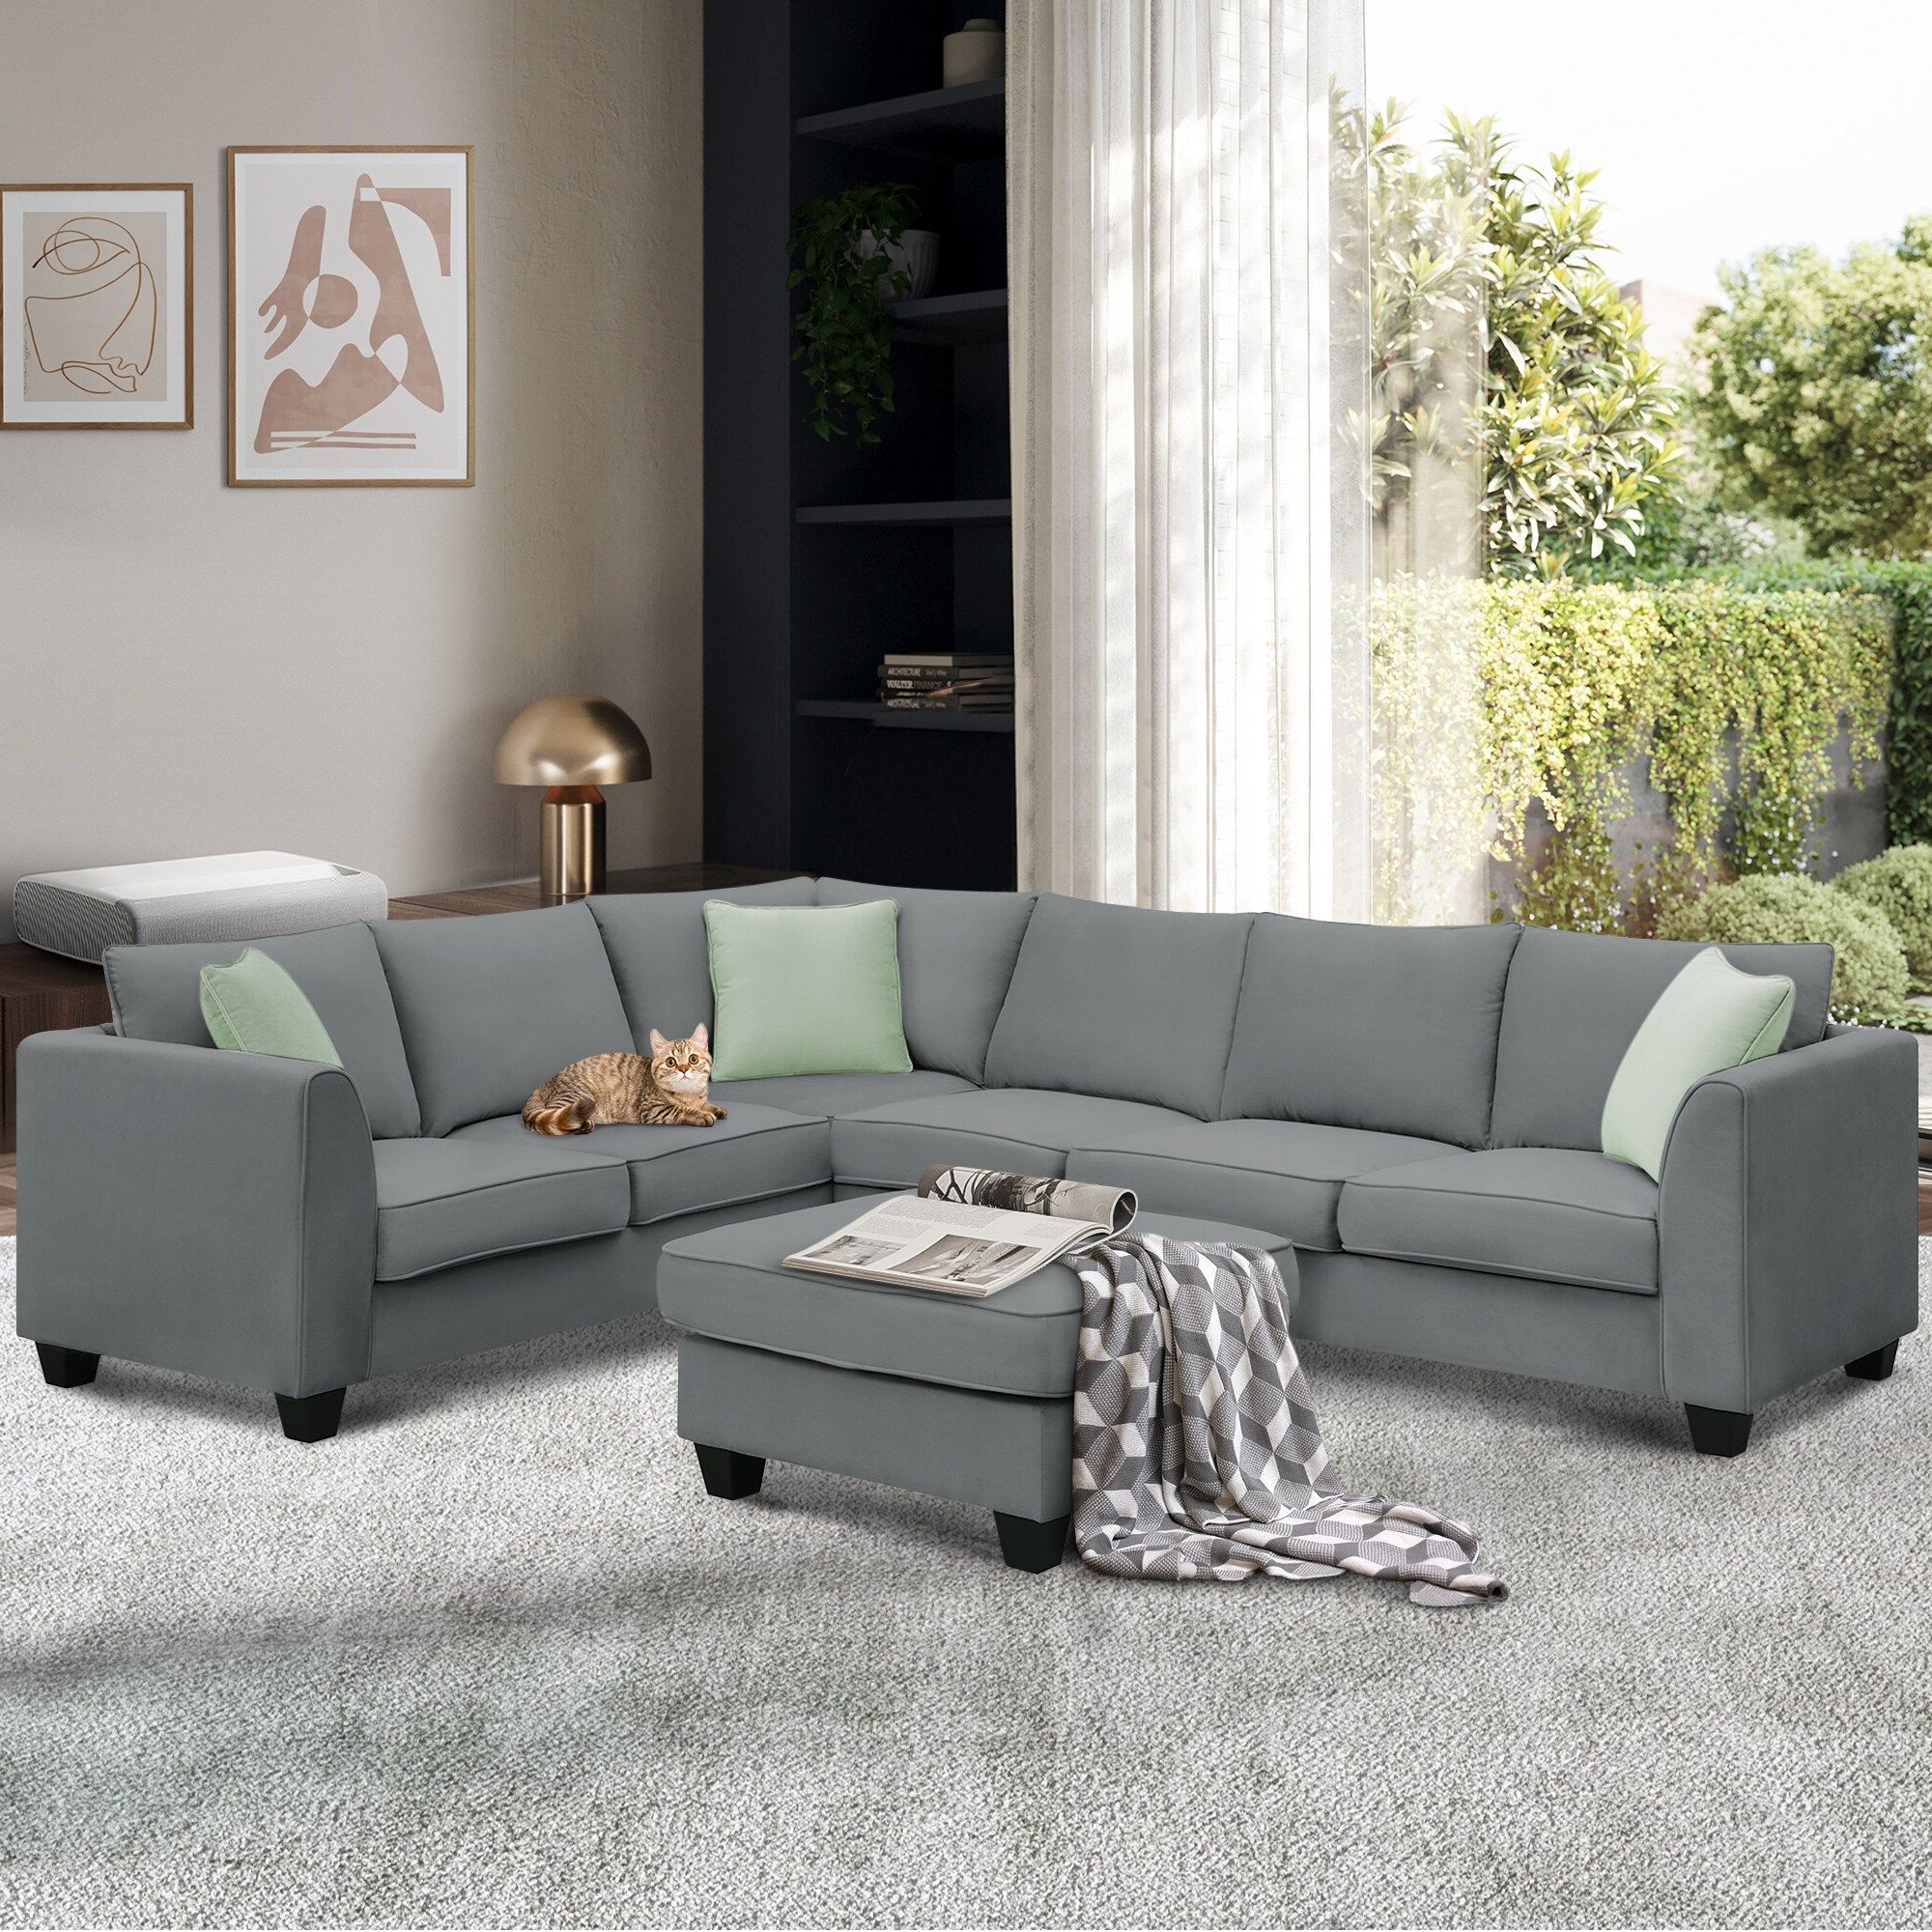 Featured Photo of 20 Inspirations 7-seater Sectional Couch with Ottoman and 3 Pillows